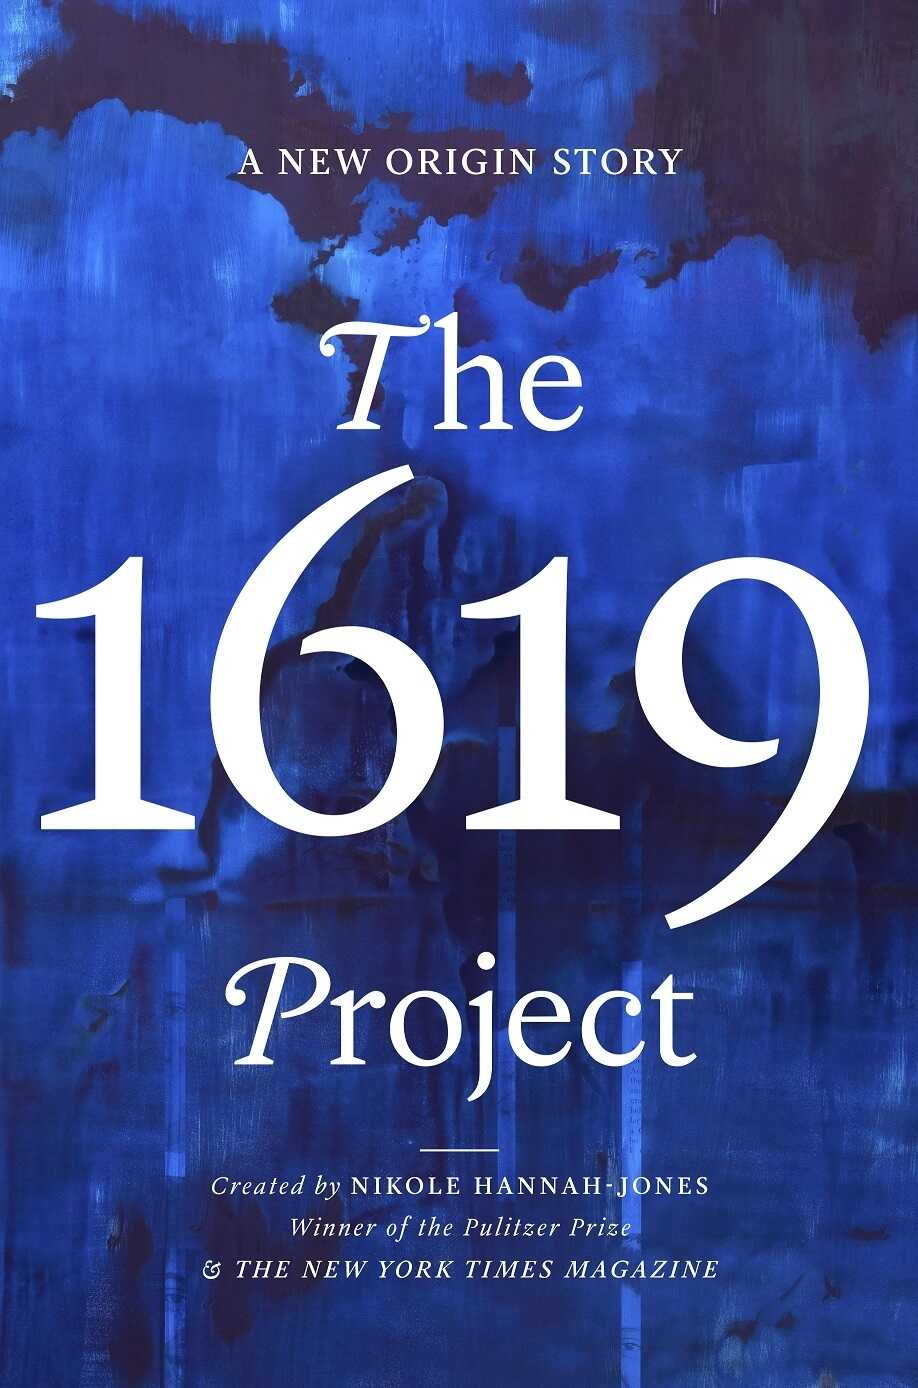 4 Things Critics Have Wrong About The 1619 Project